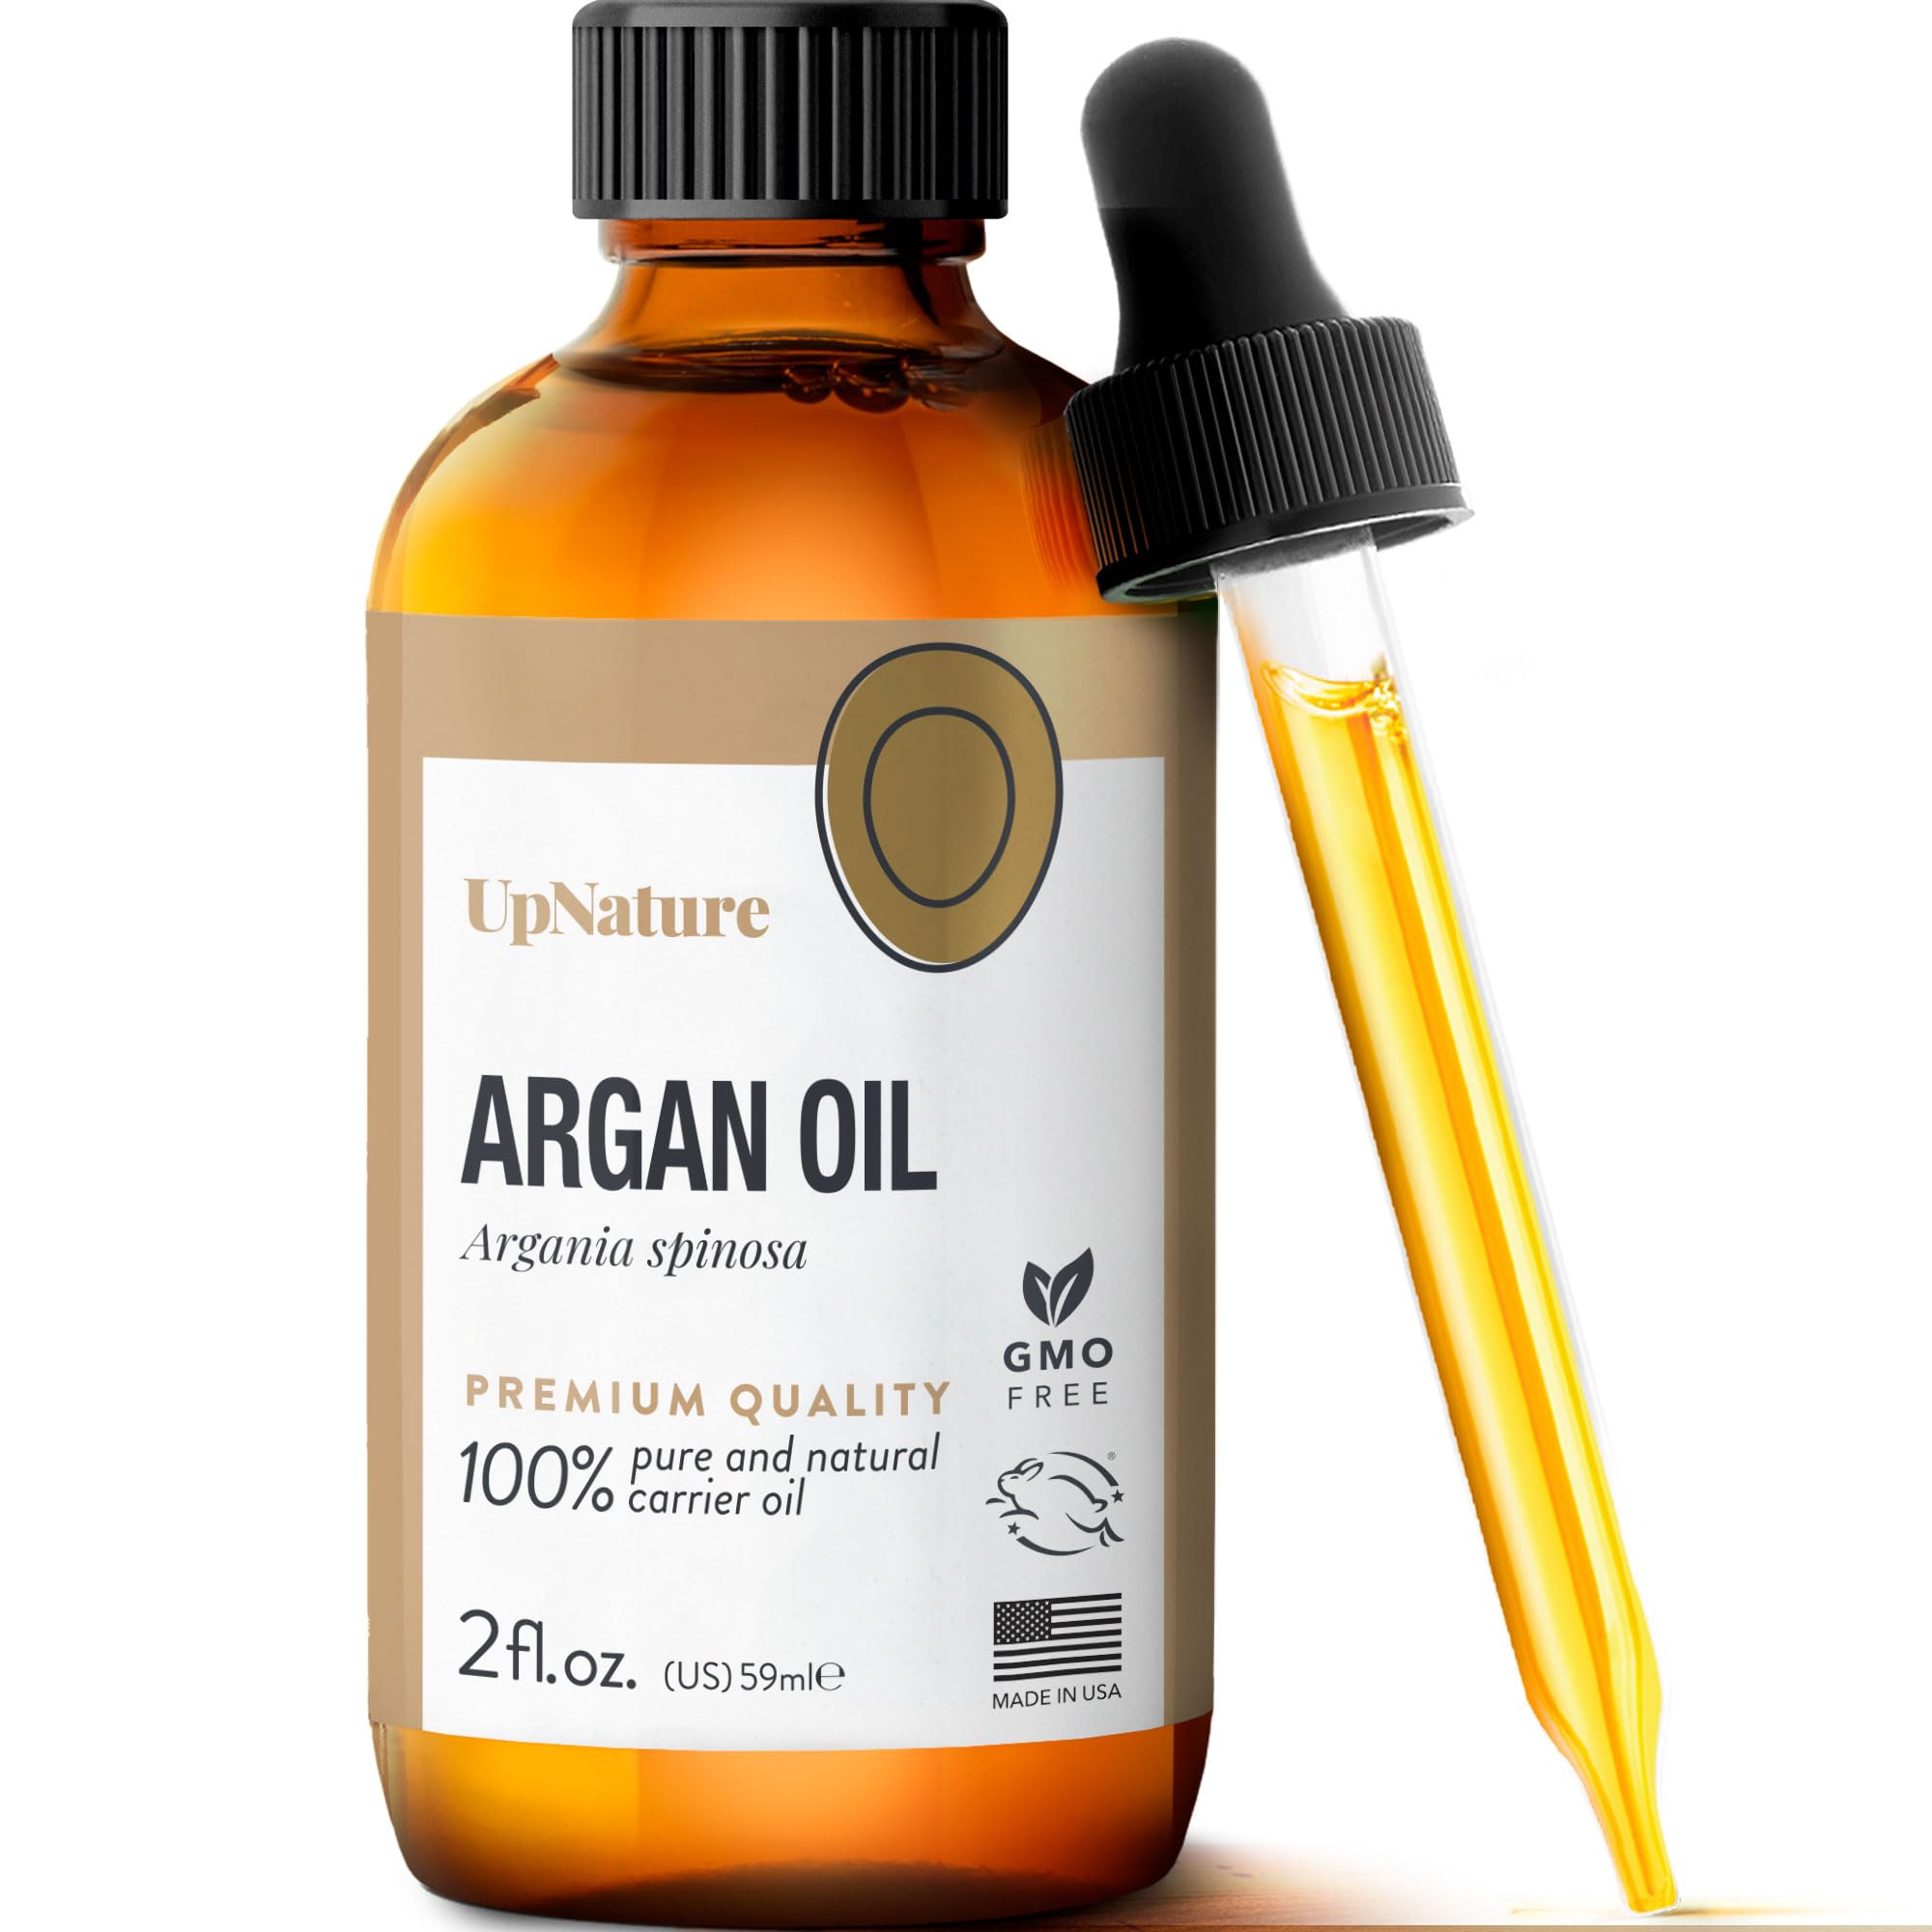 UpNature Argan Oil 2oz - 100% Natural & Pure Argan Oil for Hair Growth, Natural Cuticle Oil & Skin Care Products for Stretch Marks & Scars- Carrier Oil for Essential Oils for Skin